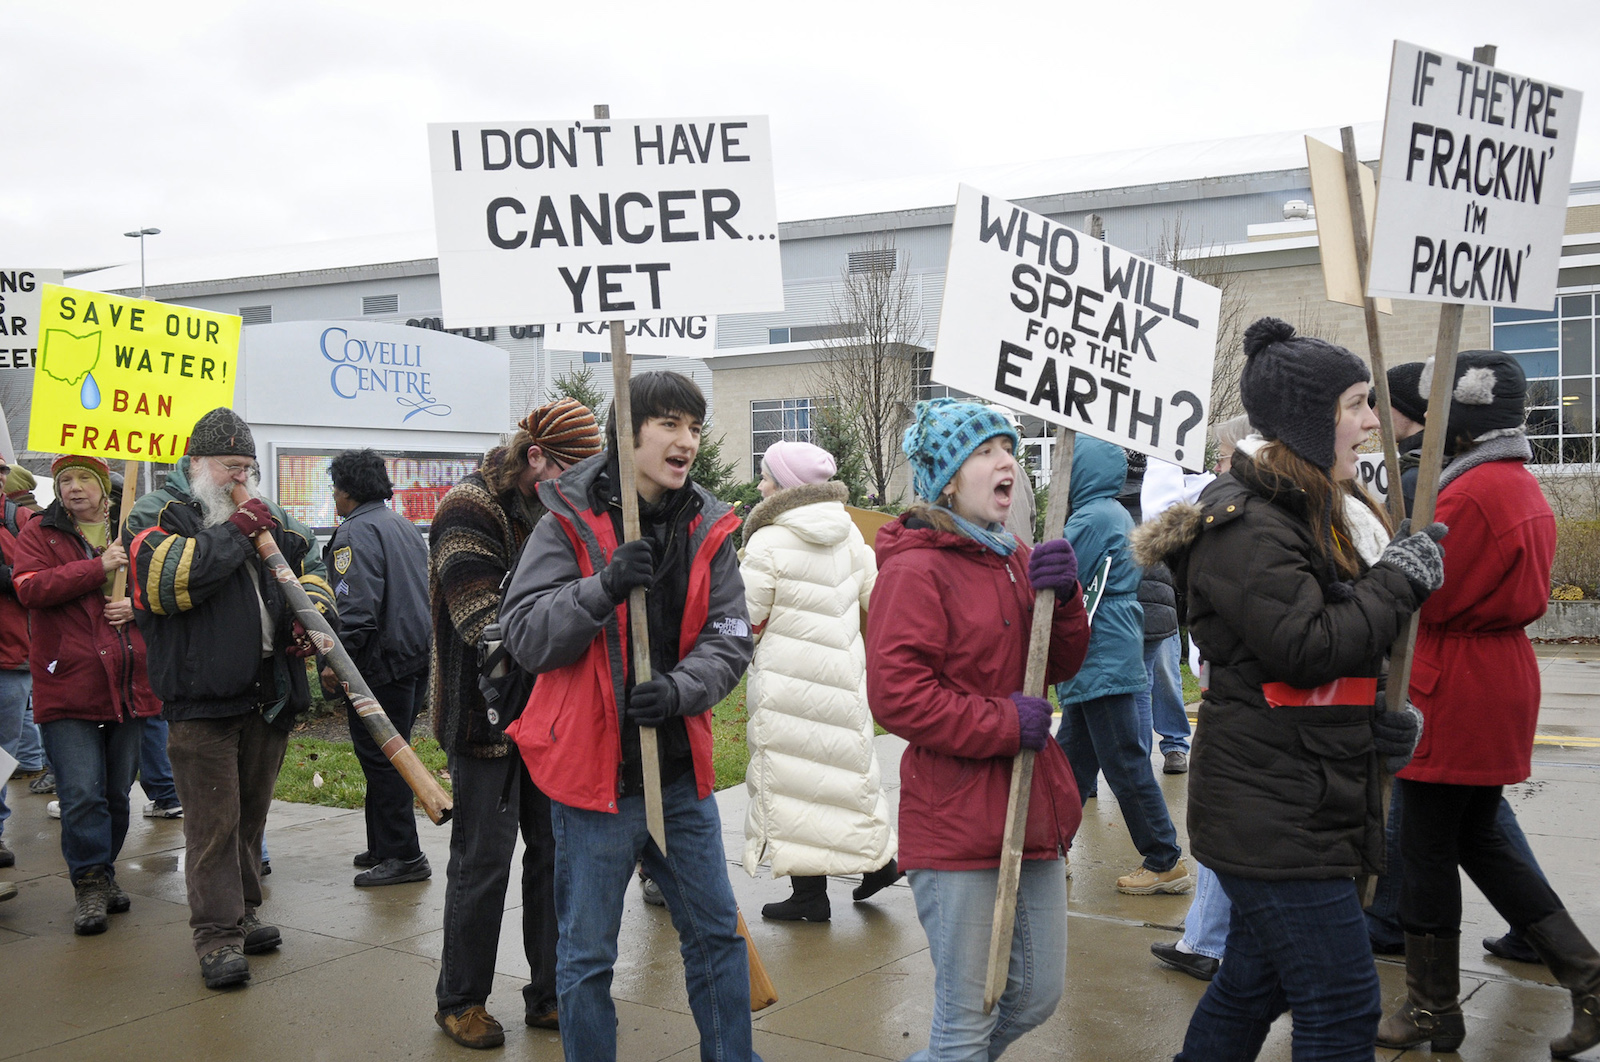 A group of protesters carry signs saying "I don't have cancer yet" and "Who will speak for the Earth"?